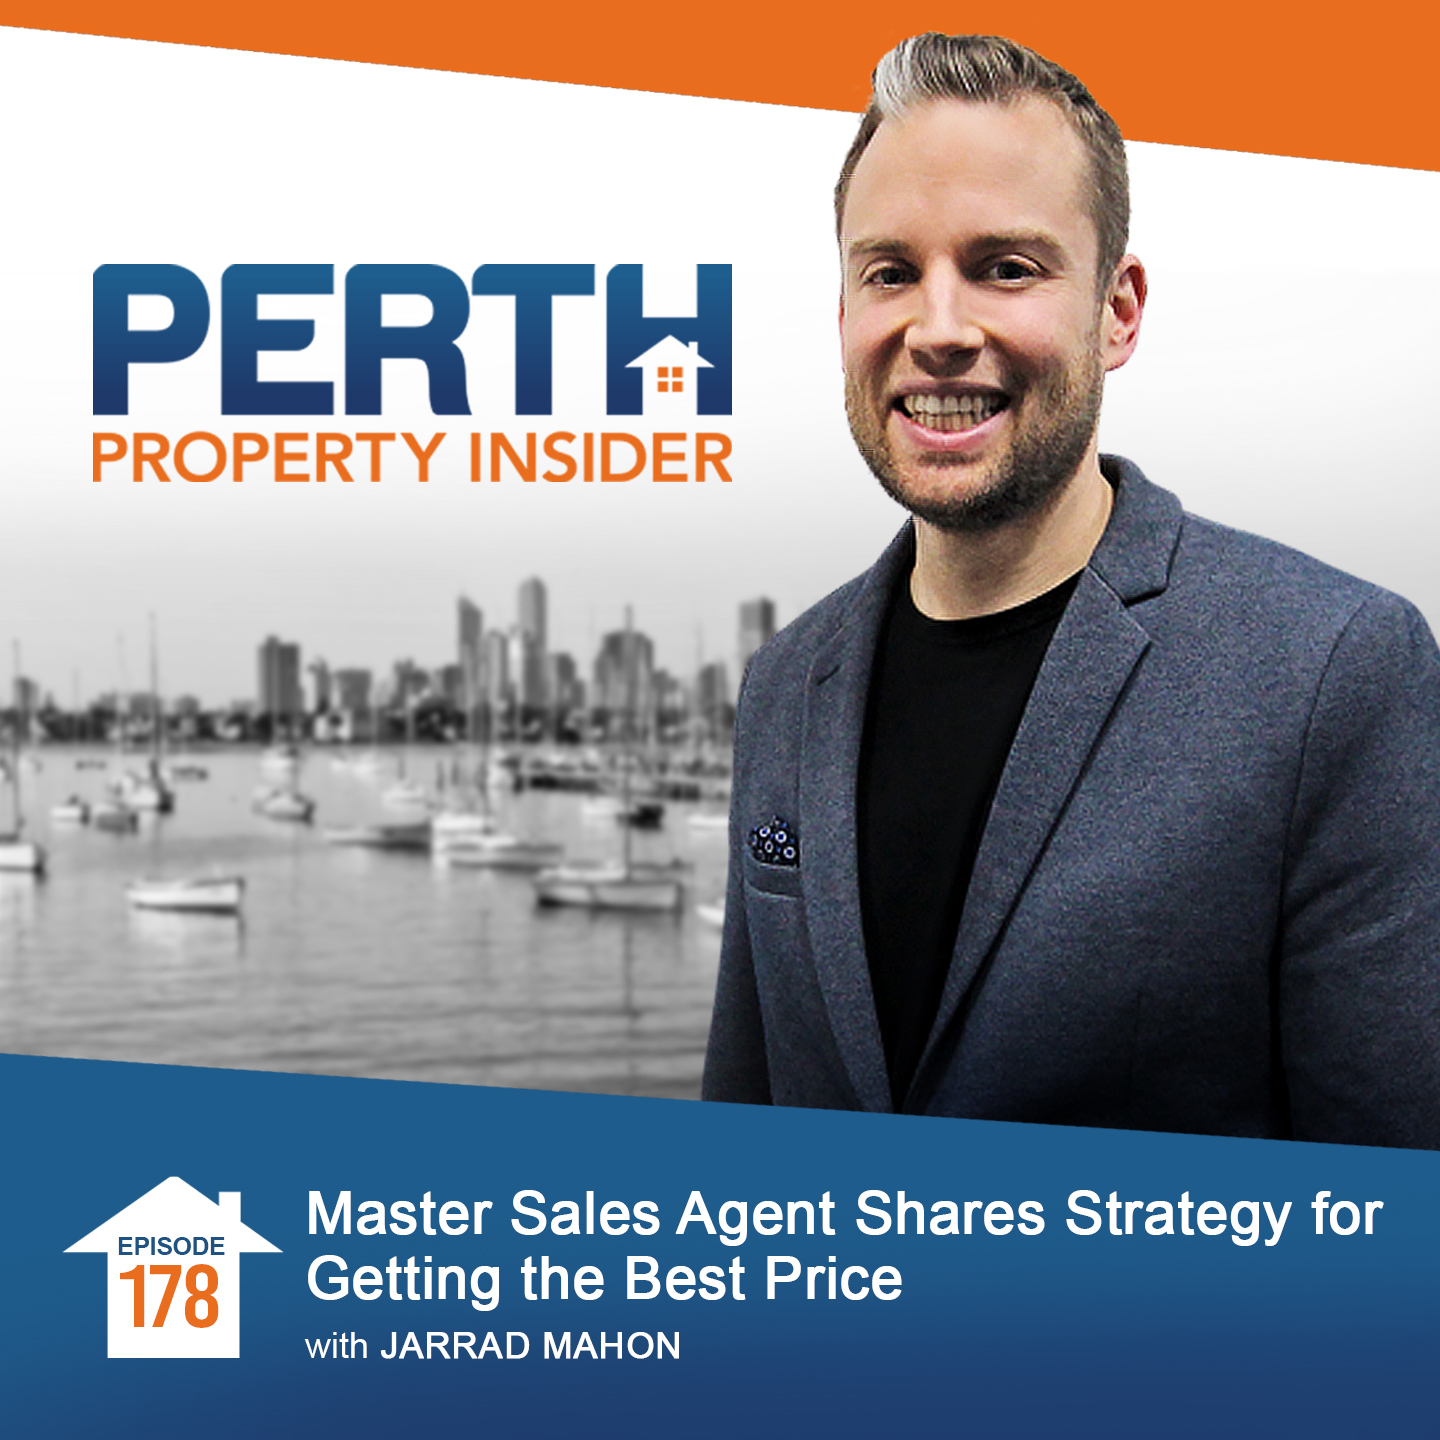 Master Sales Agent Shares Strategy for Getting the Best Price